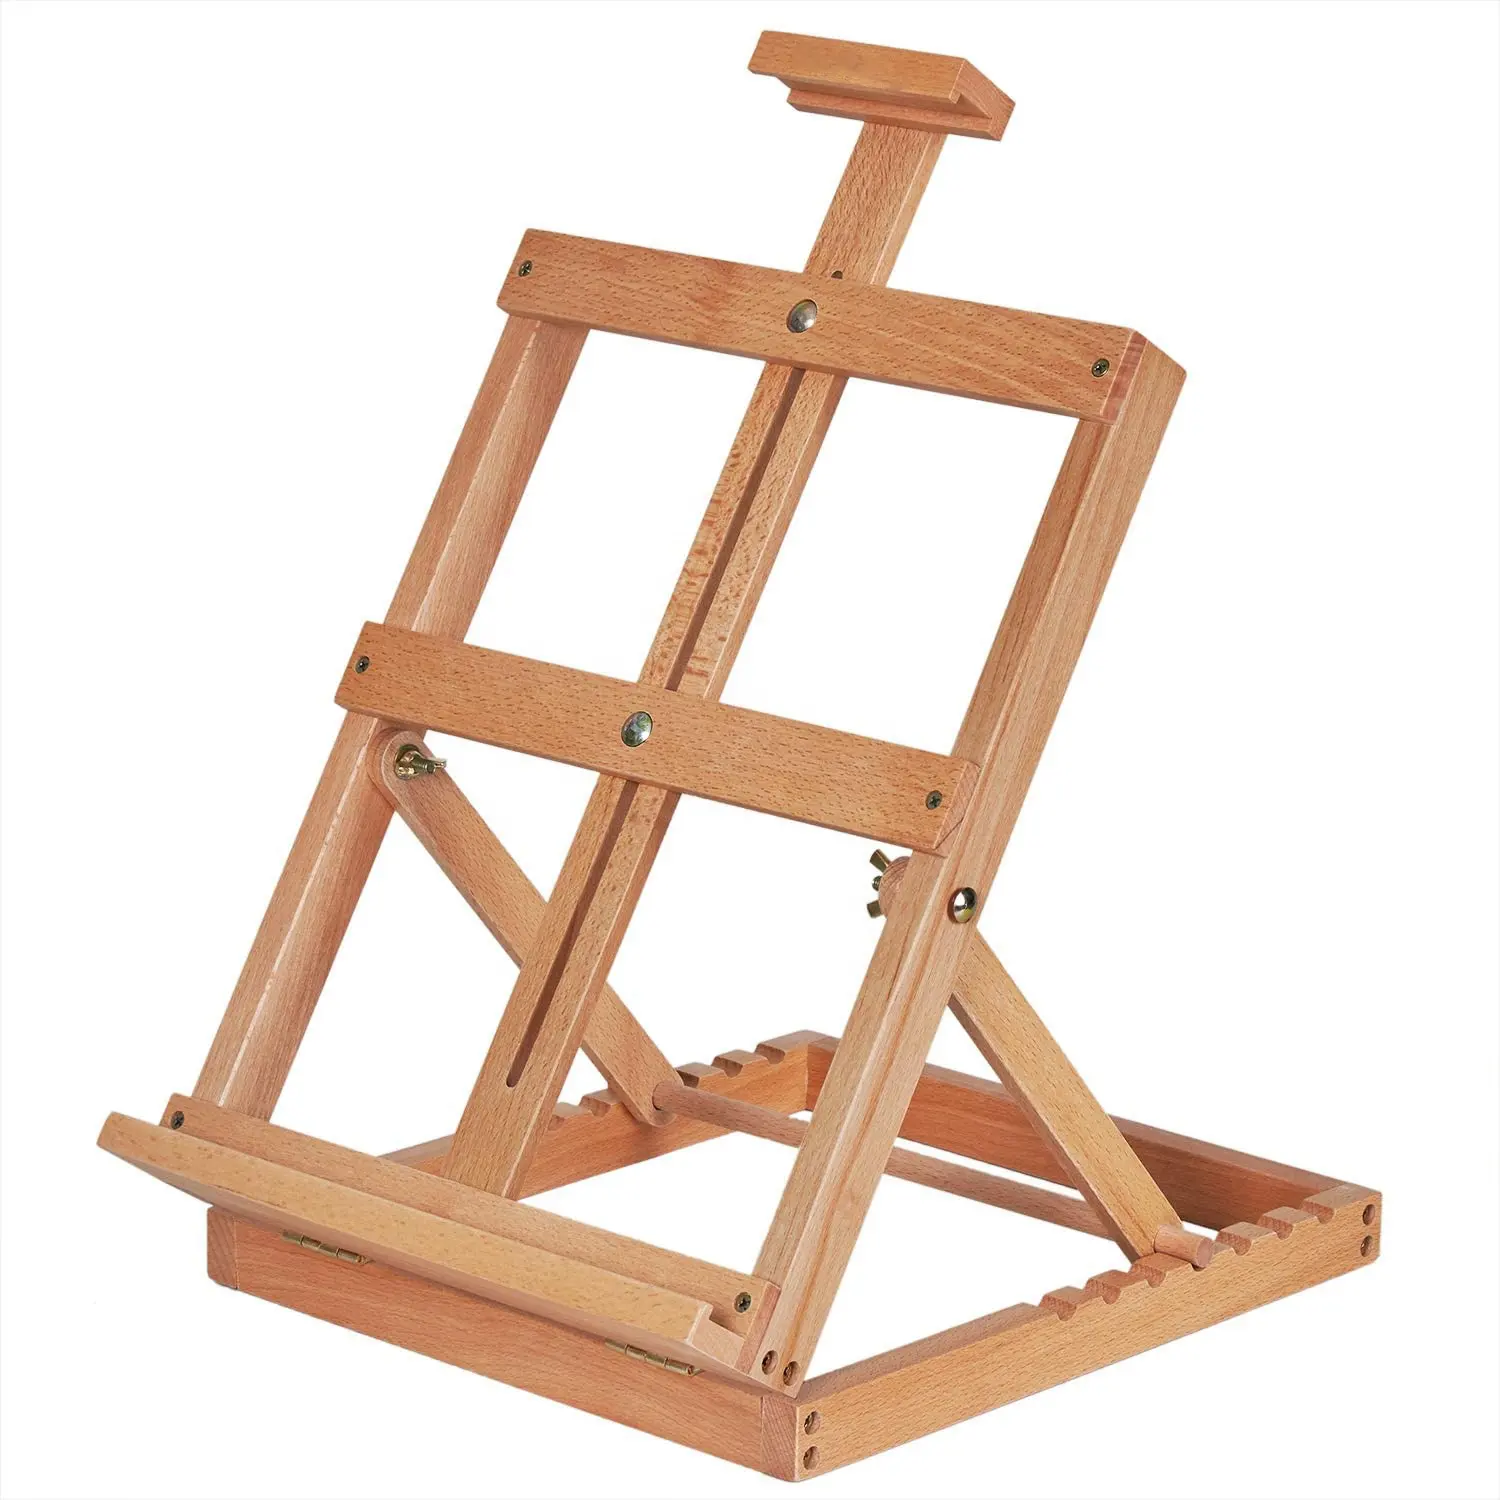 H-Frame beech Wooden Easel artist table easel ,hold canvas up to 23" High